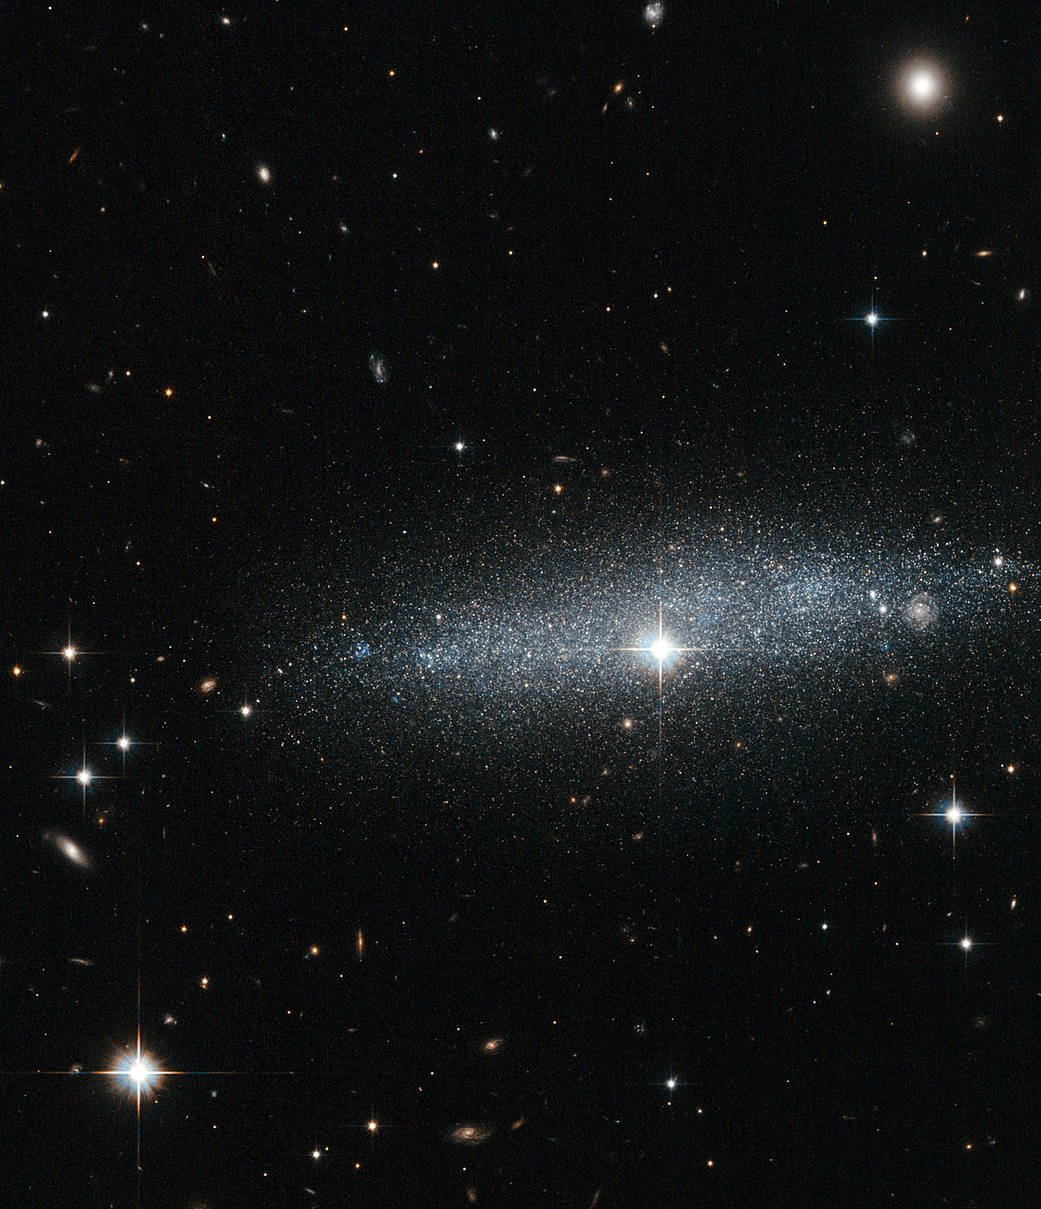 A wide view of the twinkling dwarf galaxy with bright stars all around.